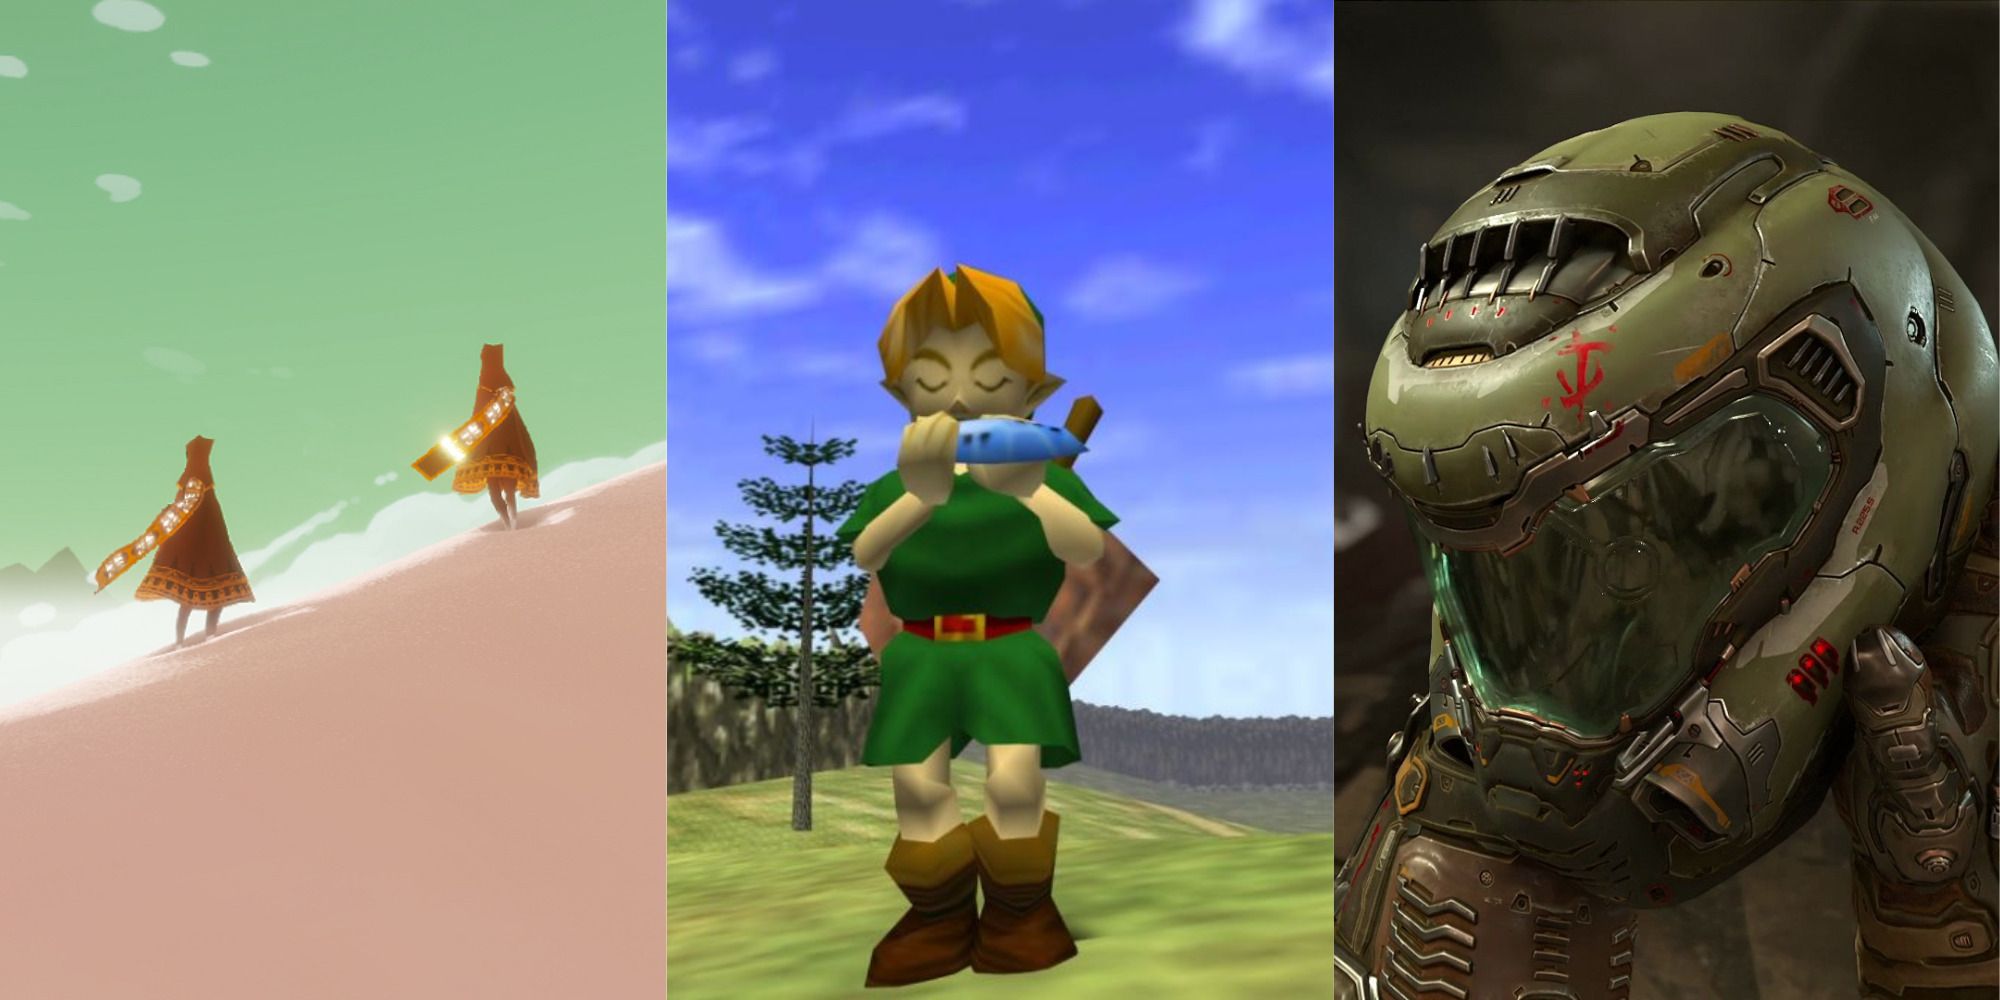 Featured image including characters from Journey on a dune, Link playing the Ocarina, And Doomguy holding his helmet